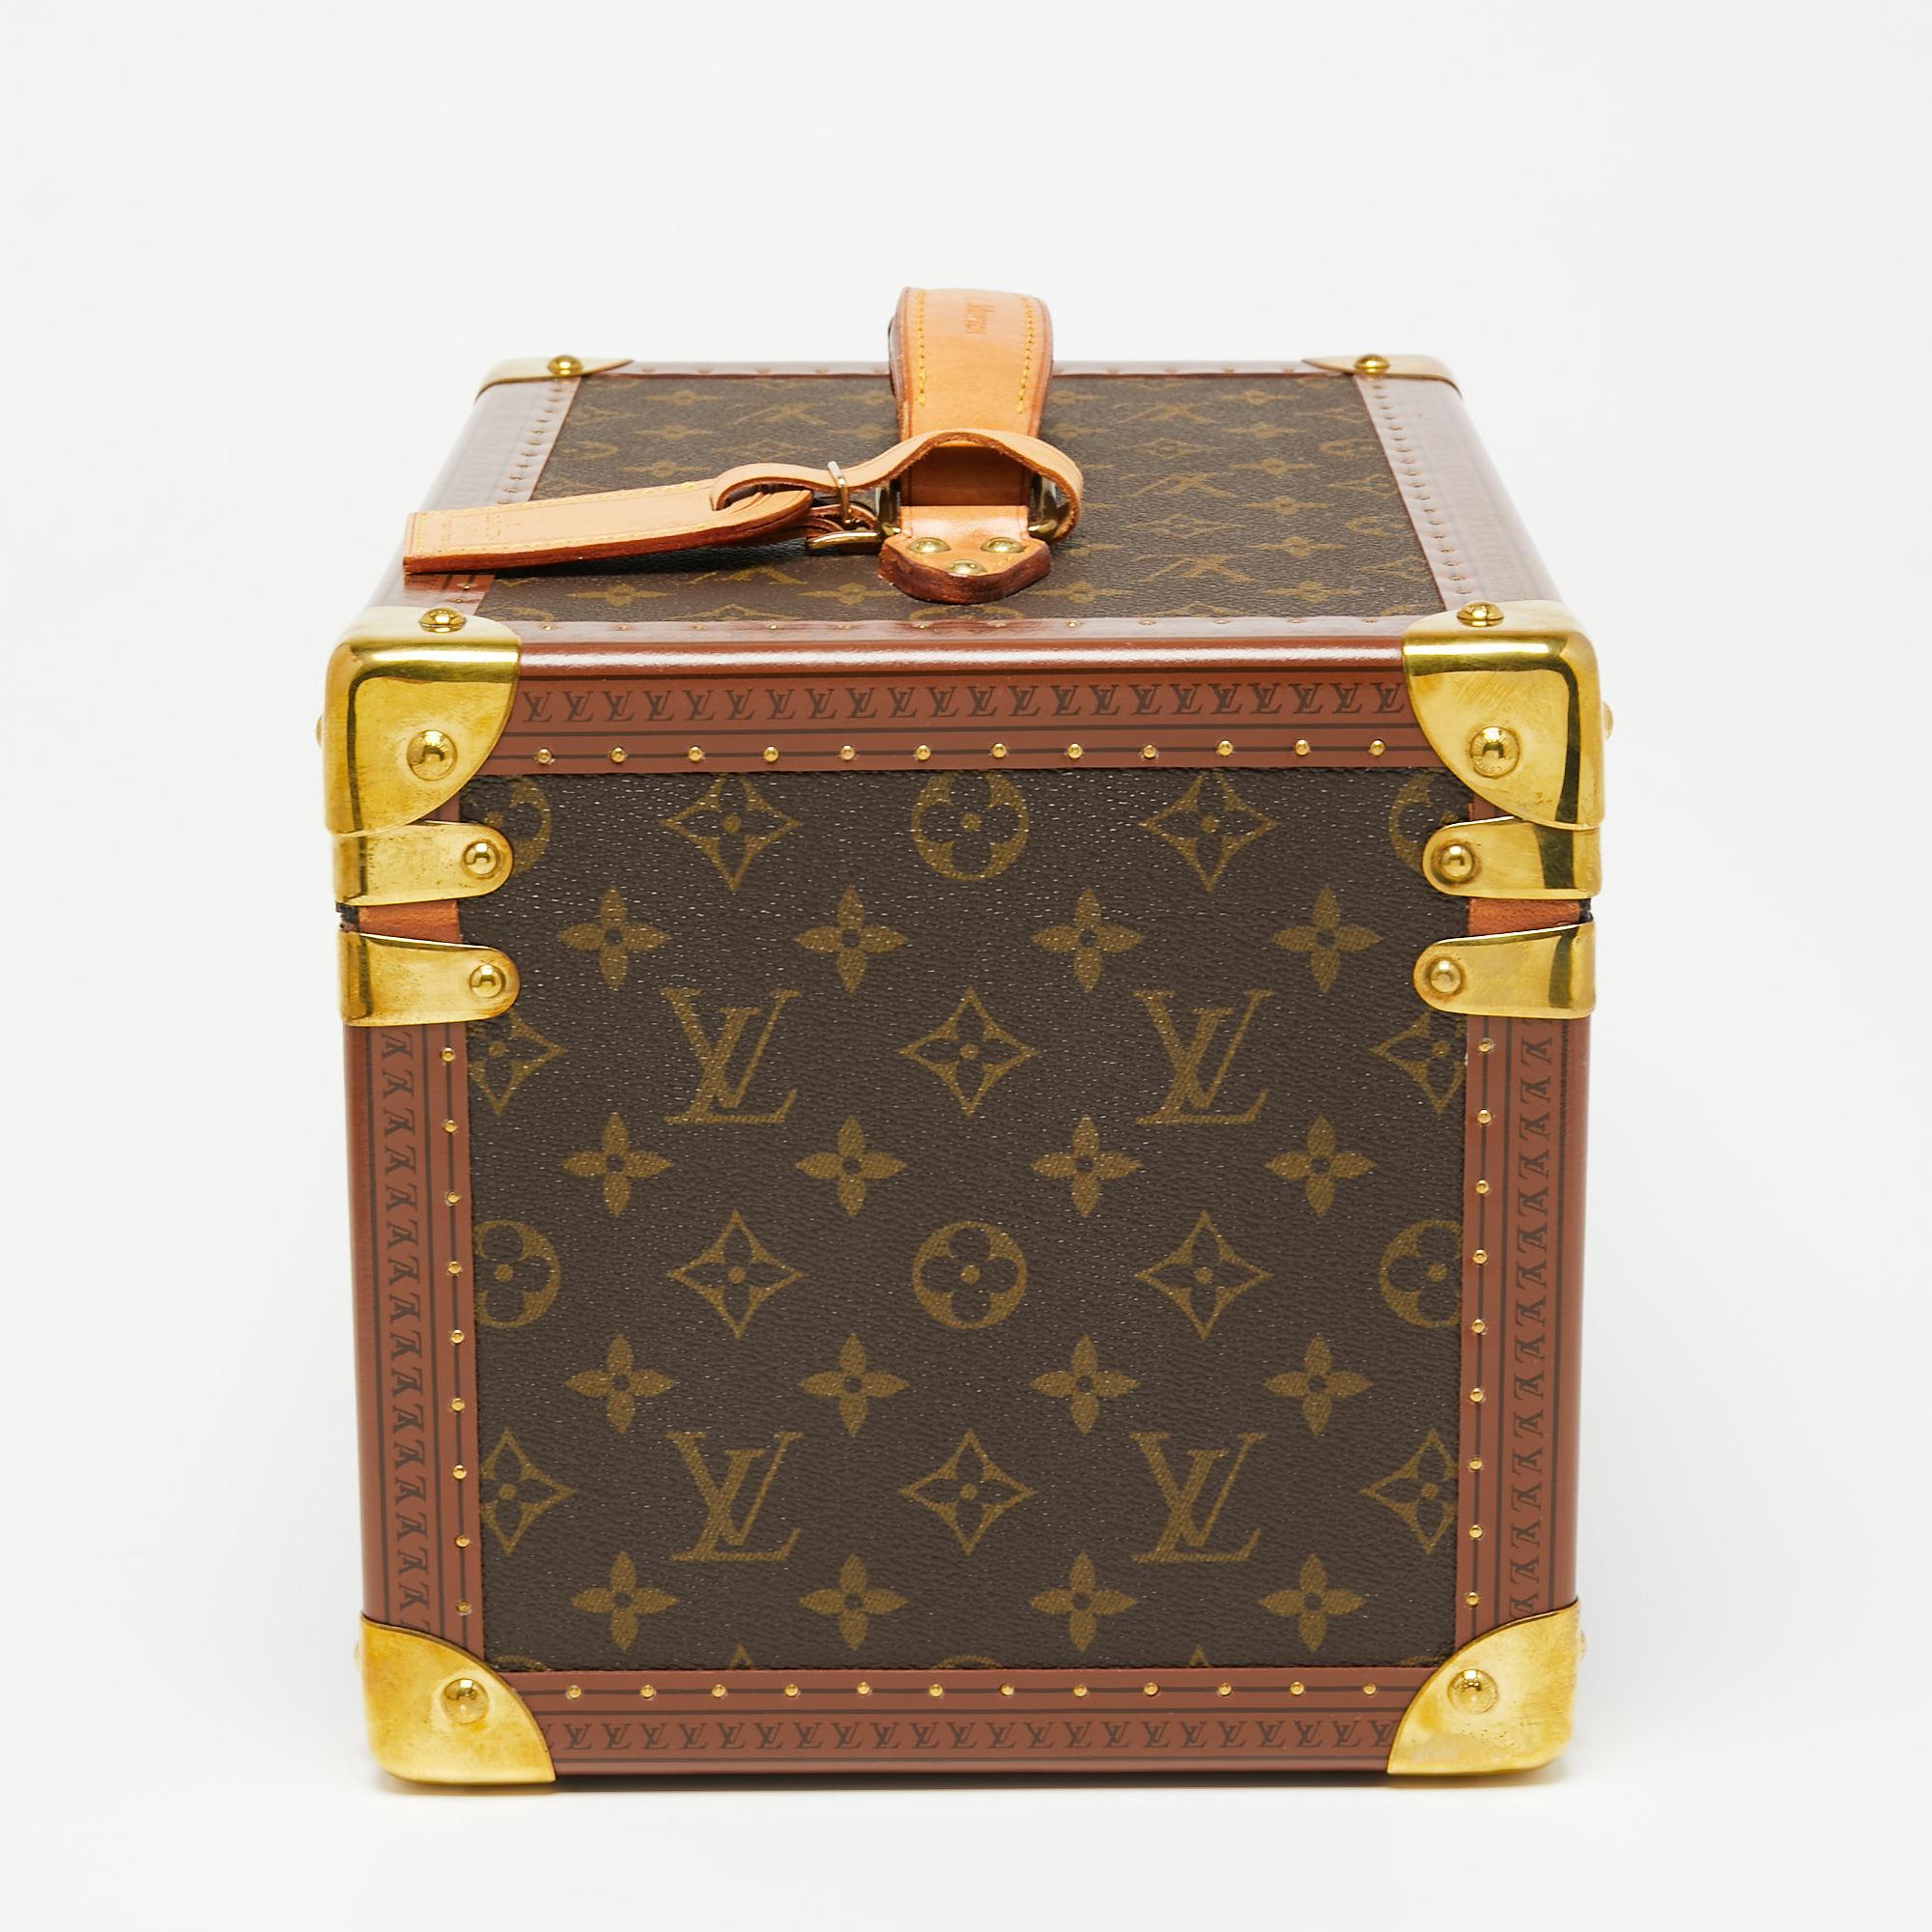 If you're looking for collectibles with a blend of modern style and exquisite craftsmanship, this Louis Vuitton beauty case trunk is the answer. Crafted from monogram coated canvas and leather trims, it features the famous trunk design of the 1800s